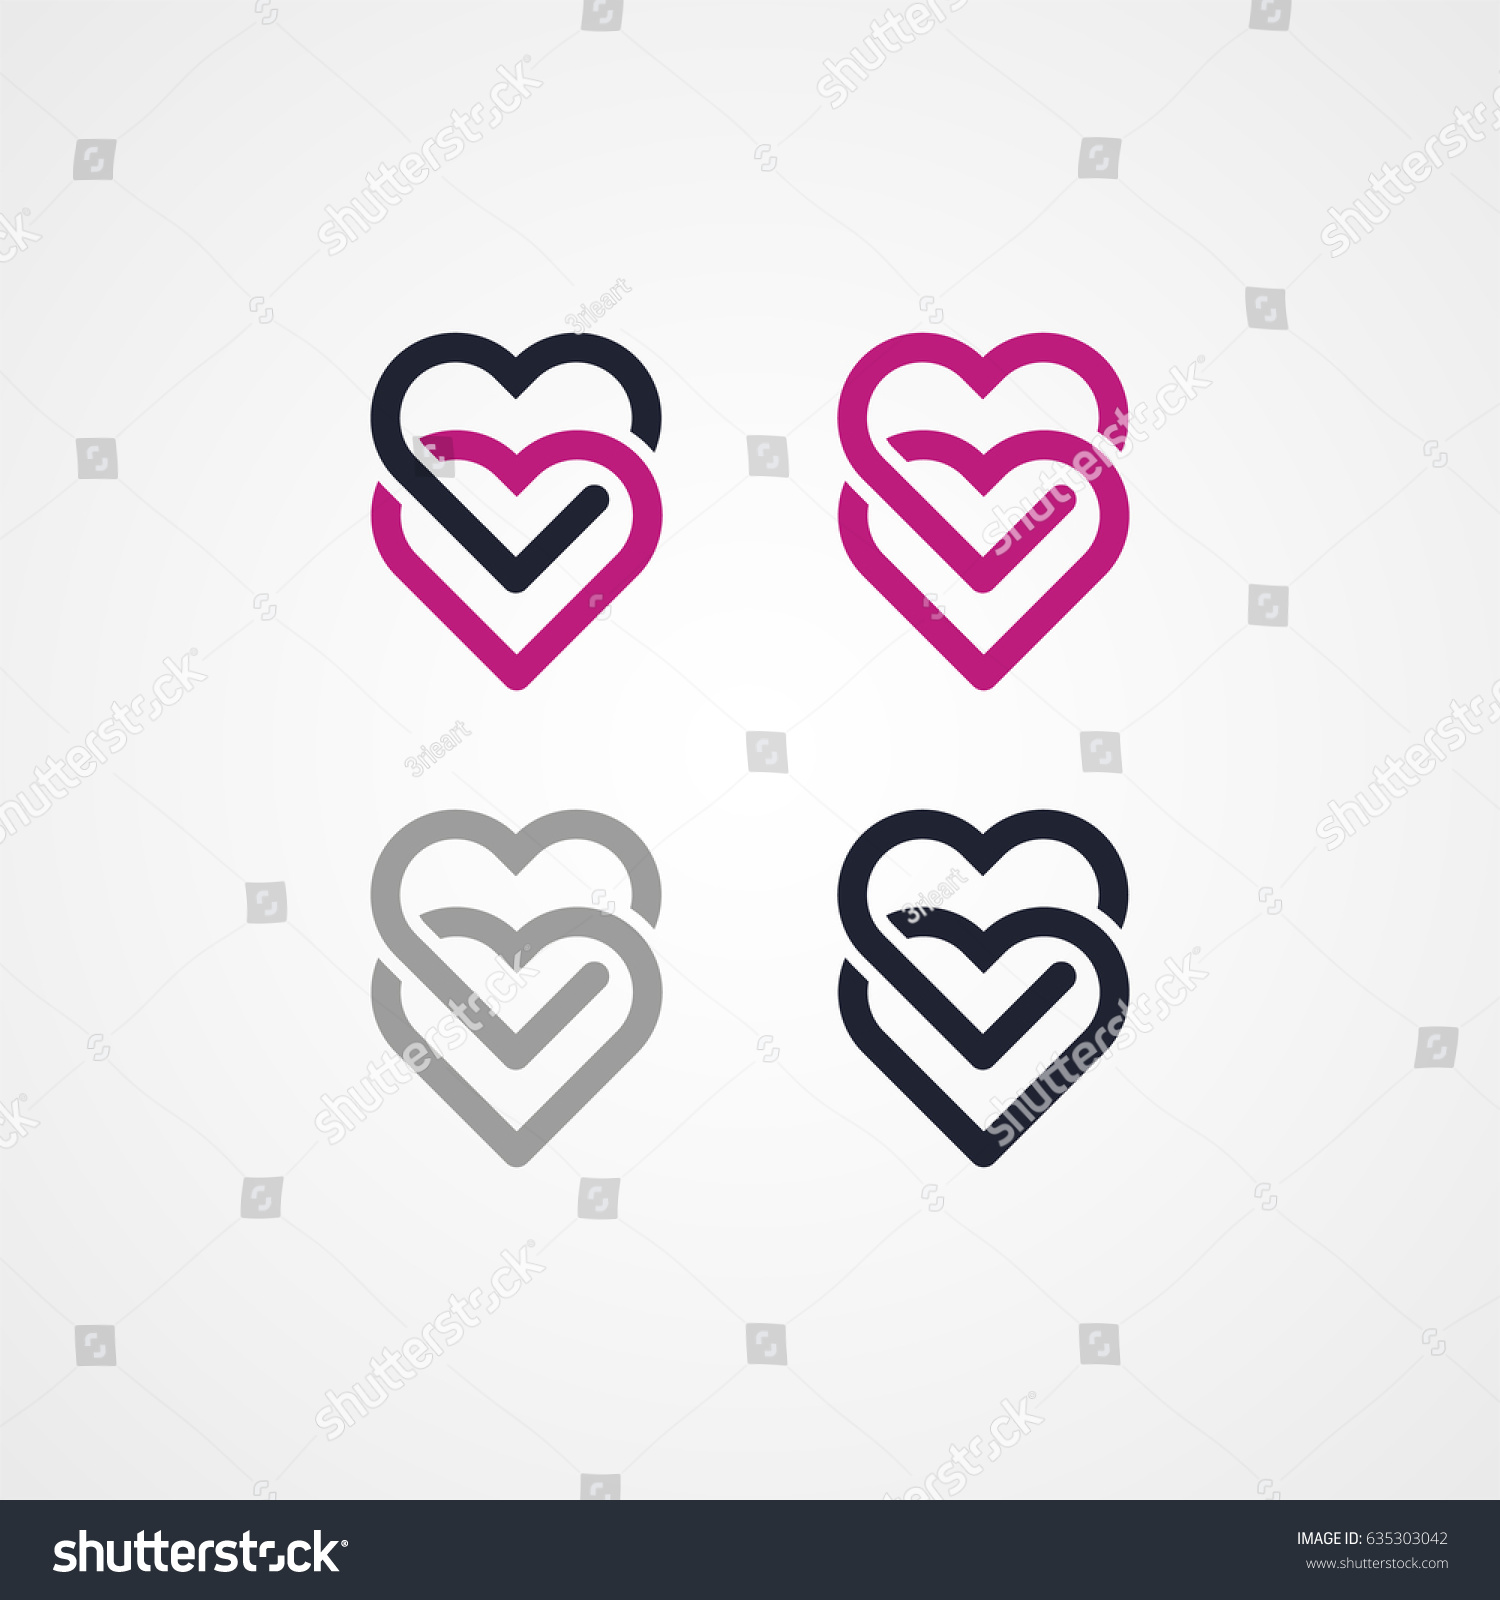 SVG of double heart connected logo icon with various color svg